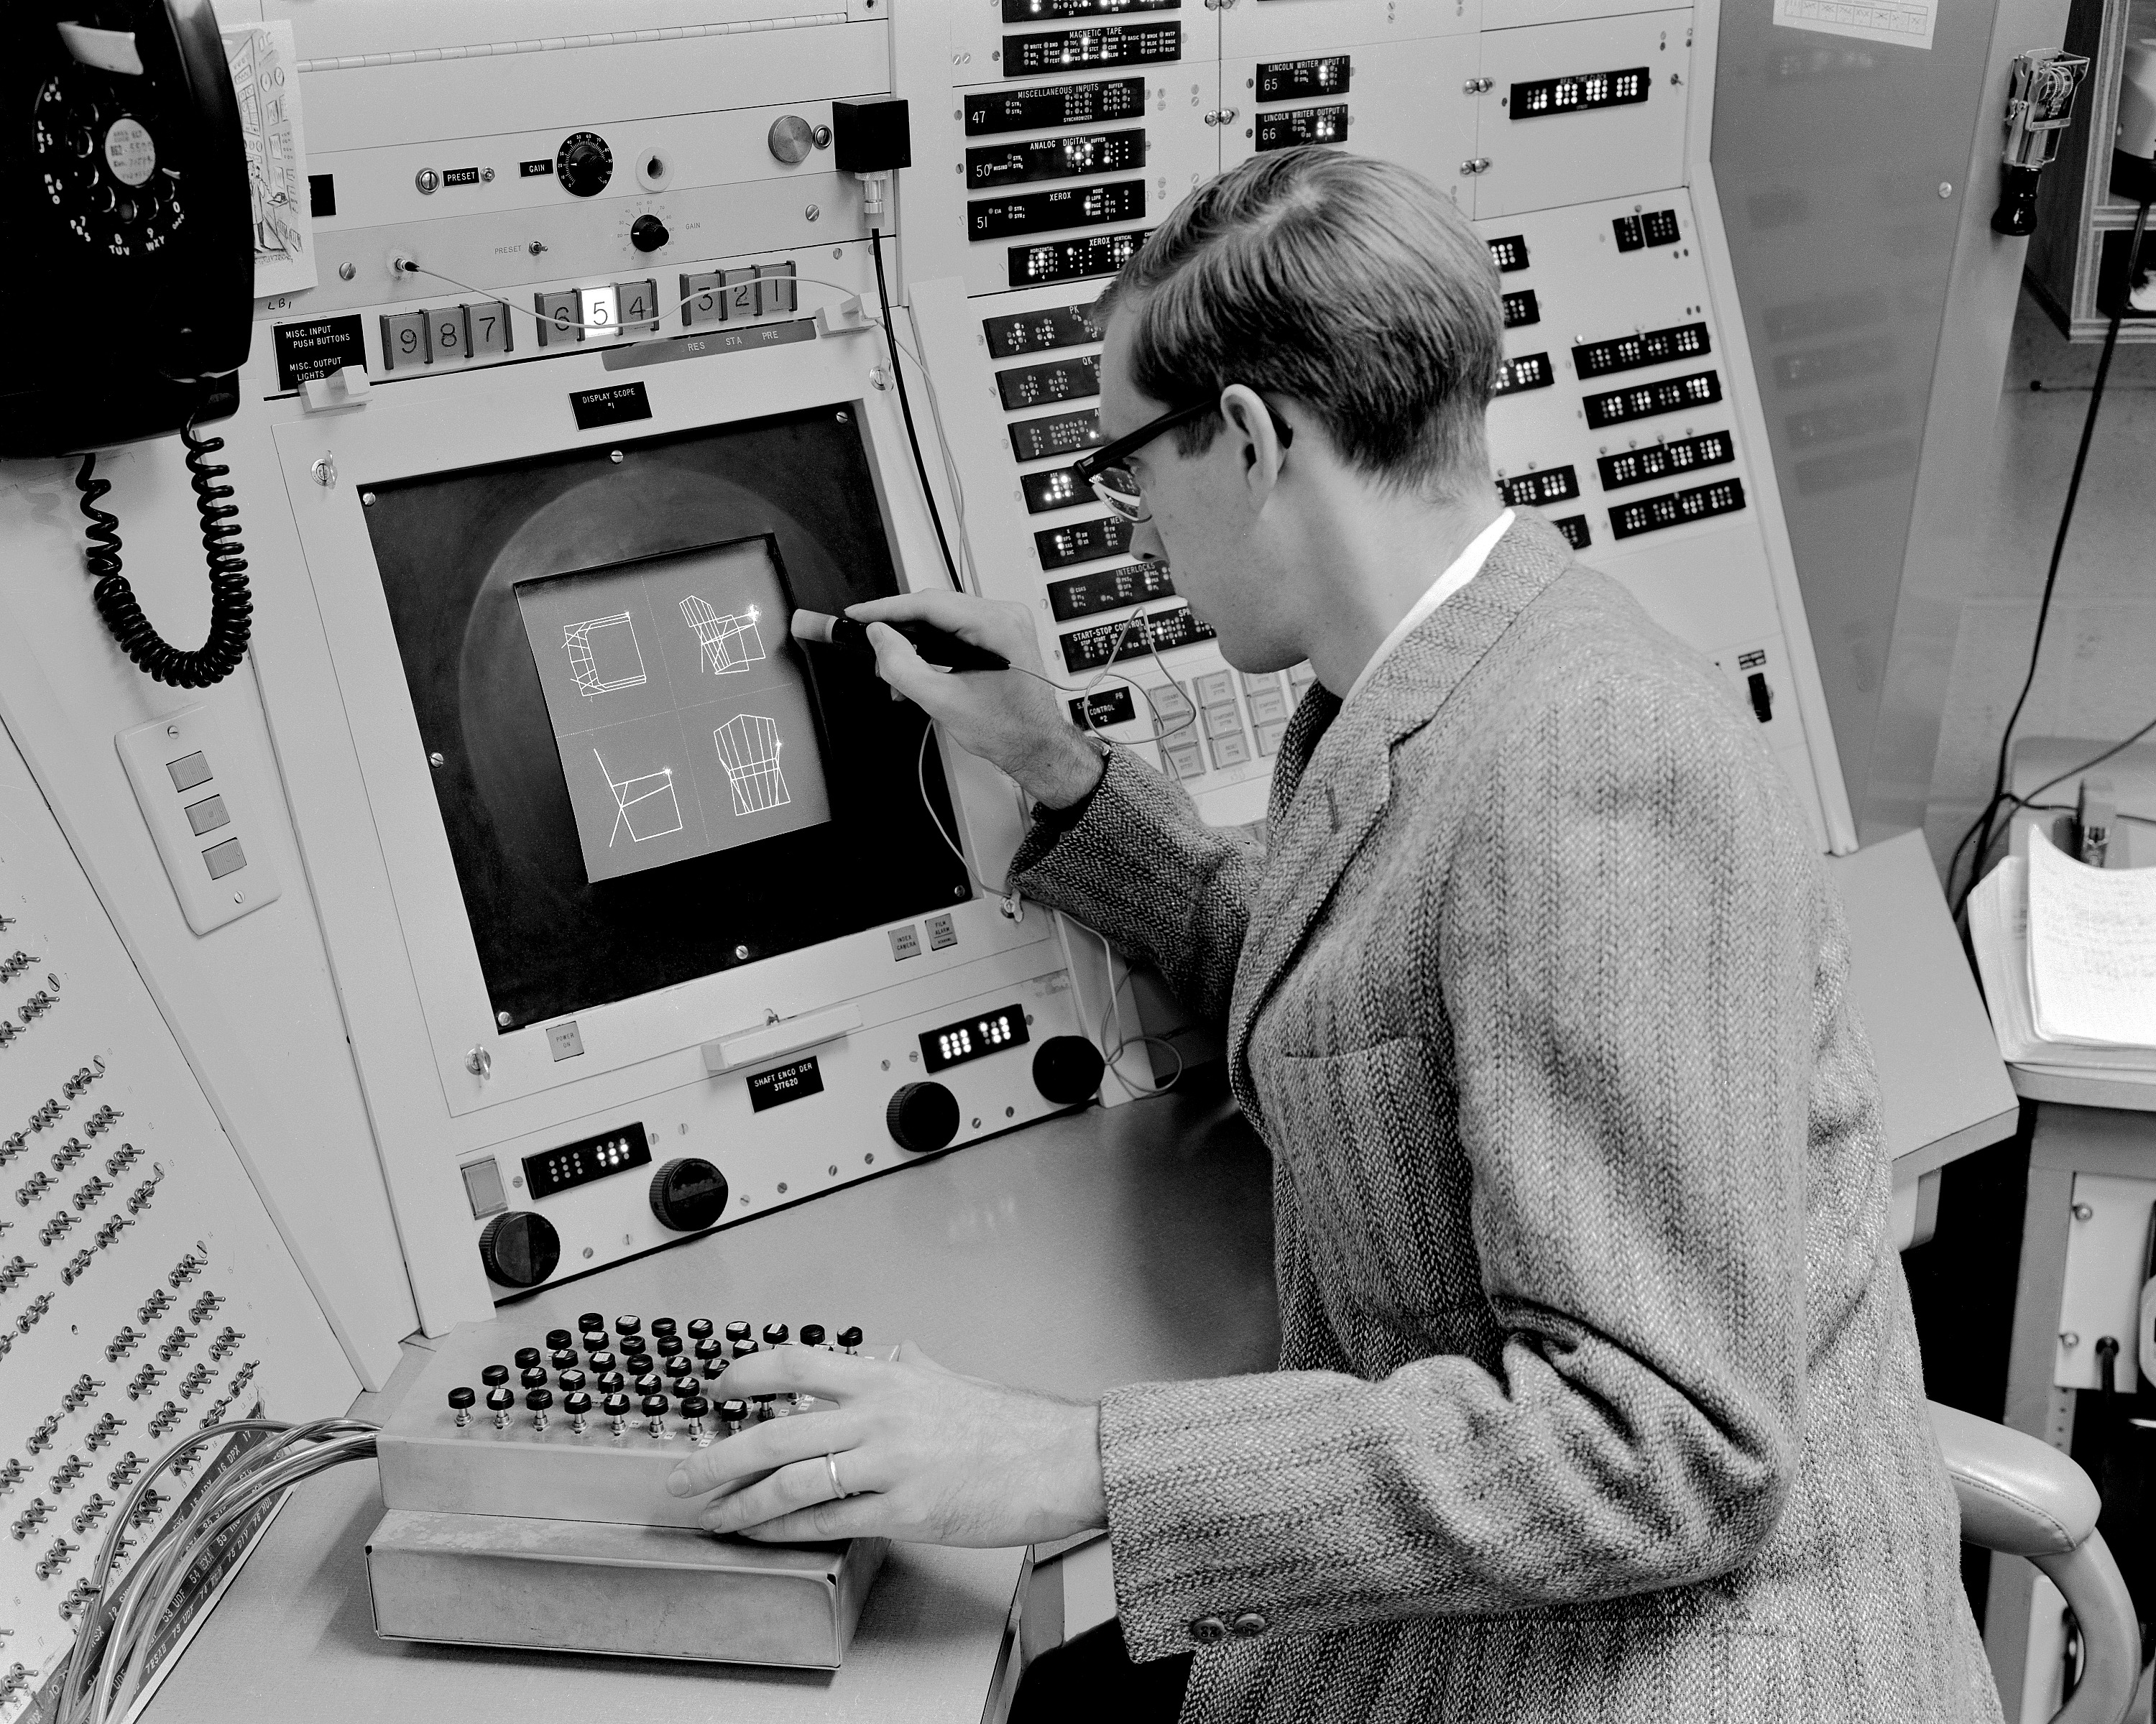 P91-233: 12/06/1963, Timothy Johnson uses Sketchpad on the TX-2 computer